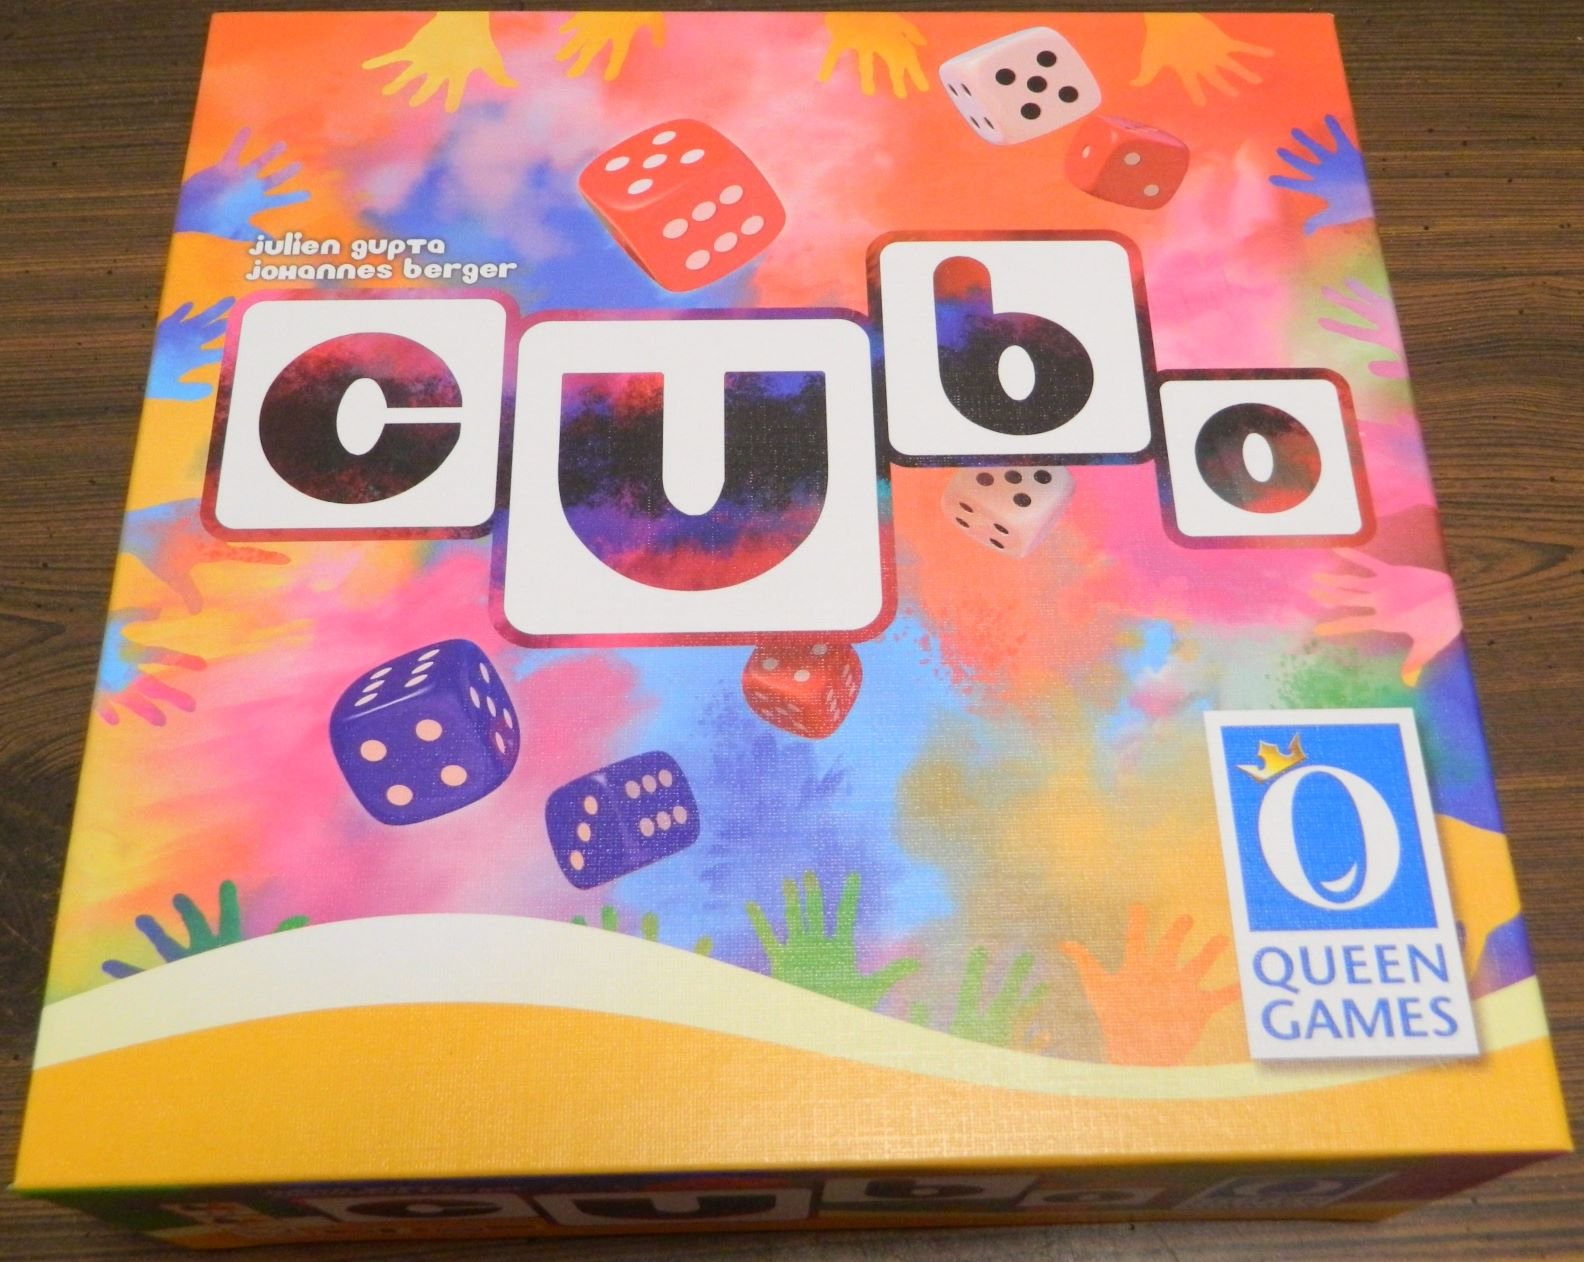 Box for Cubo